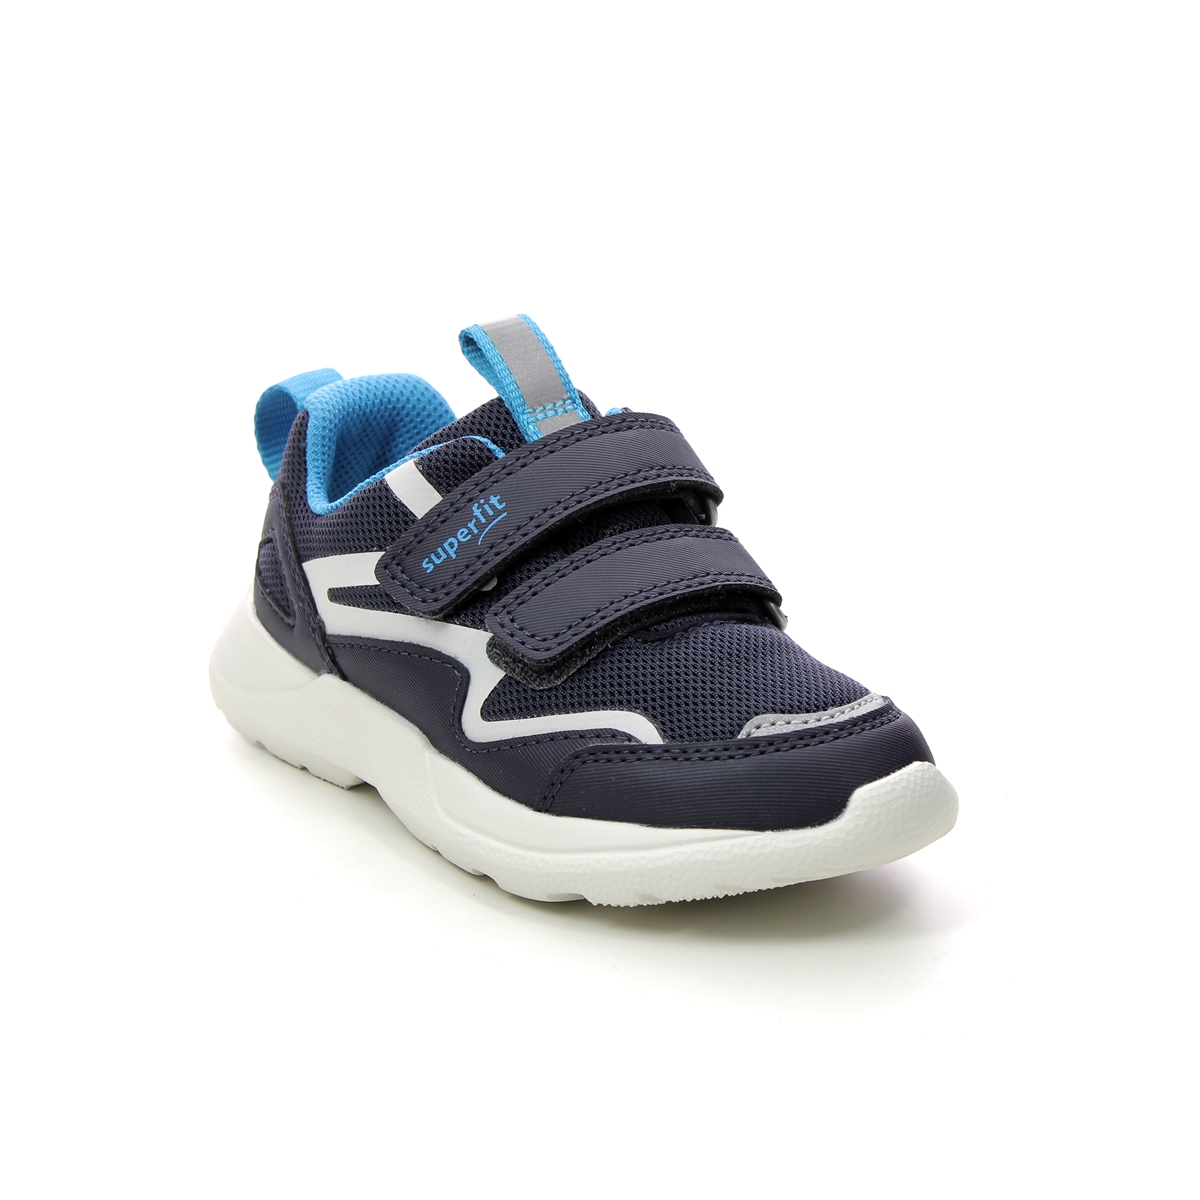 Superfit Rush Mini Navy Kids Trainers 1006206-8000 In Size 22 In Plain Navy For kids